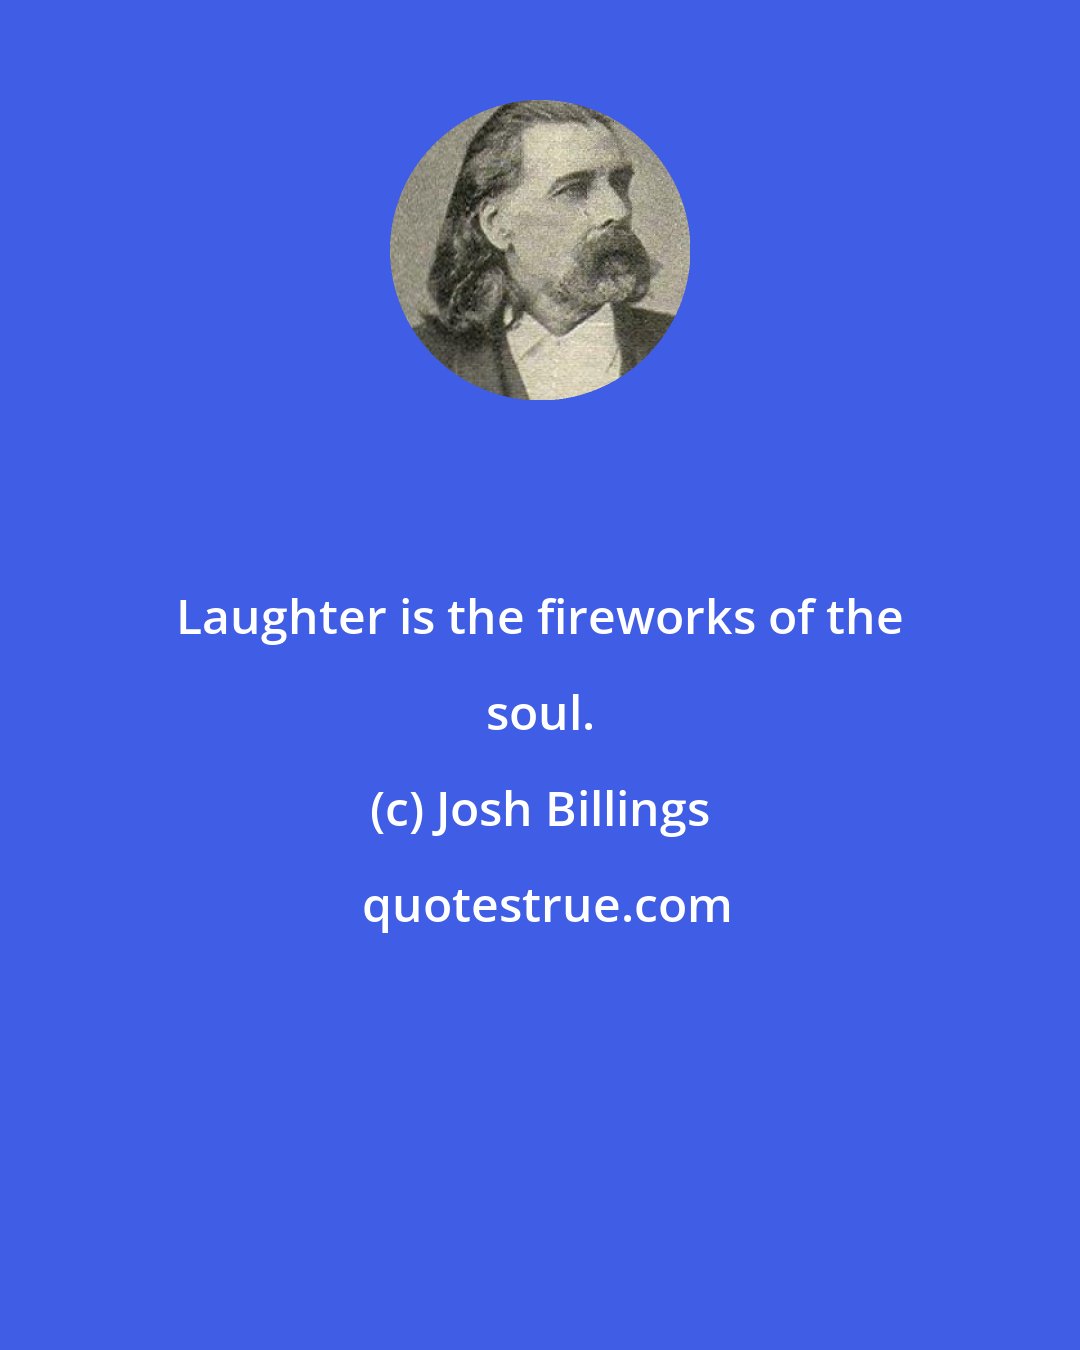 Josh Billings: Laughter is the fireworks of the soul.